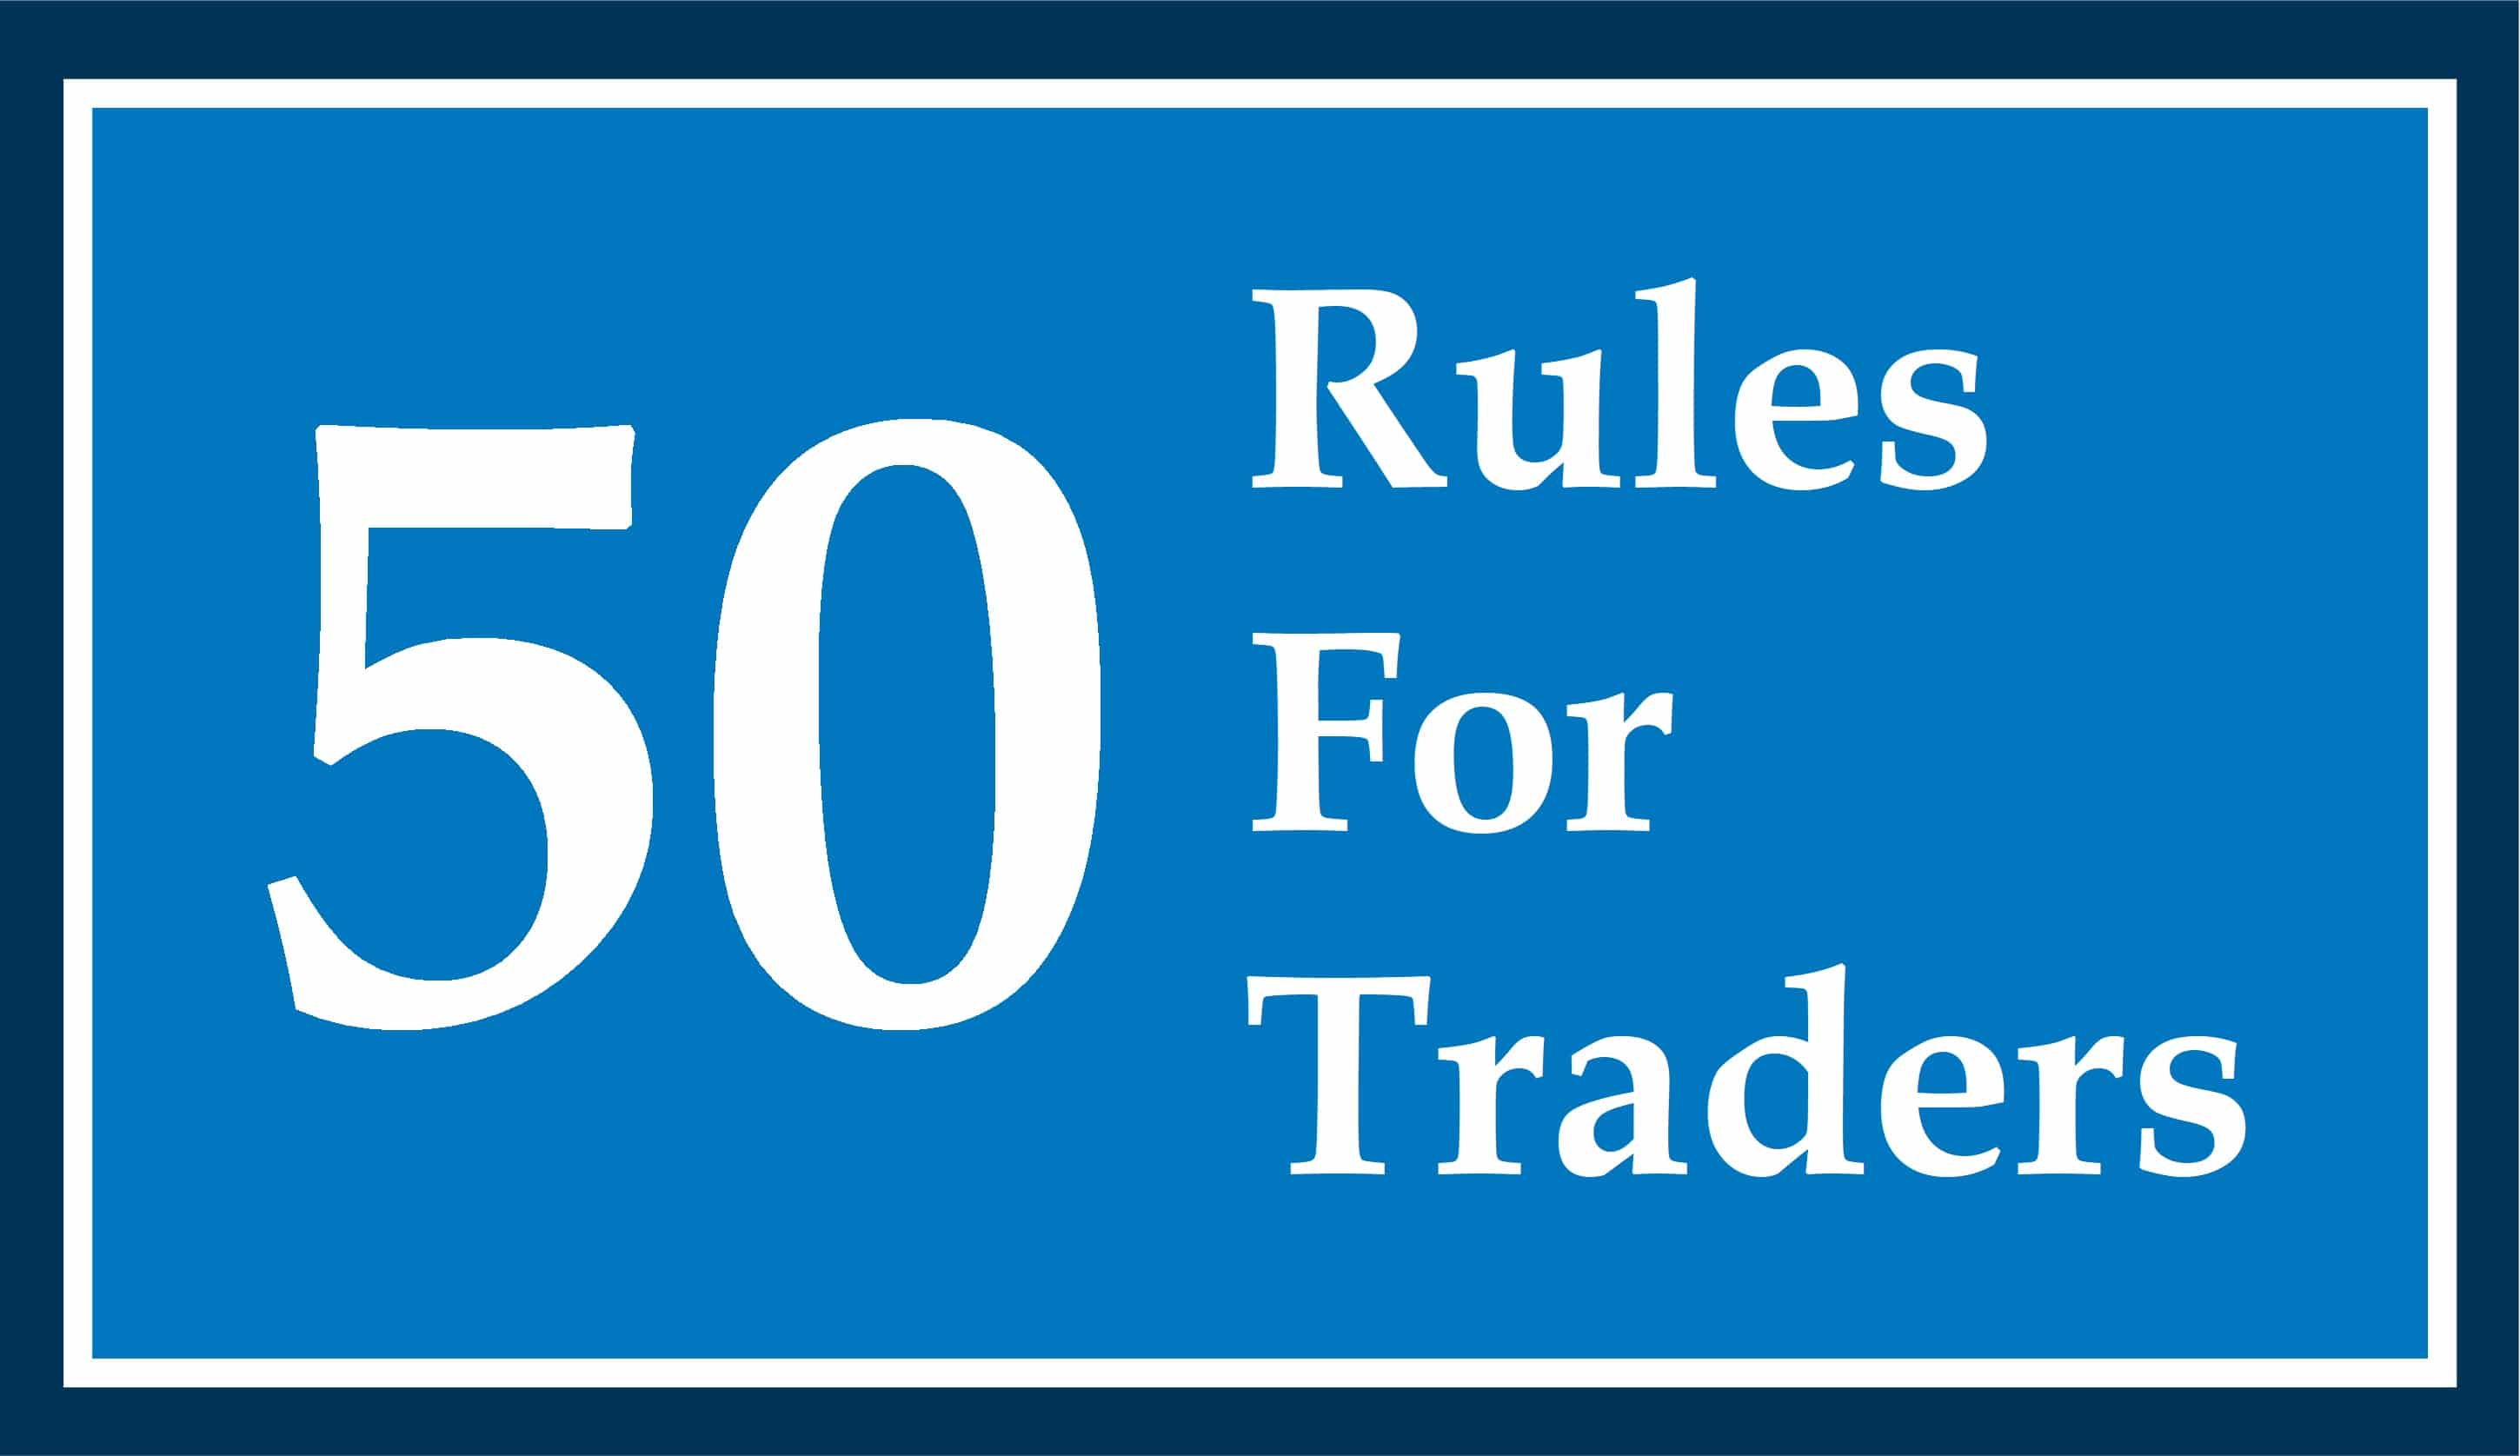 The Rules of Trading: 50 Golden Rules Traders Must Abide By